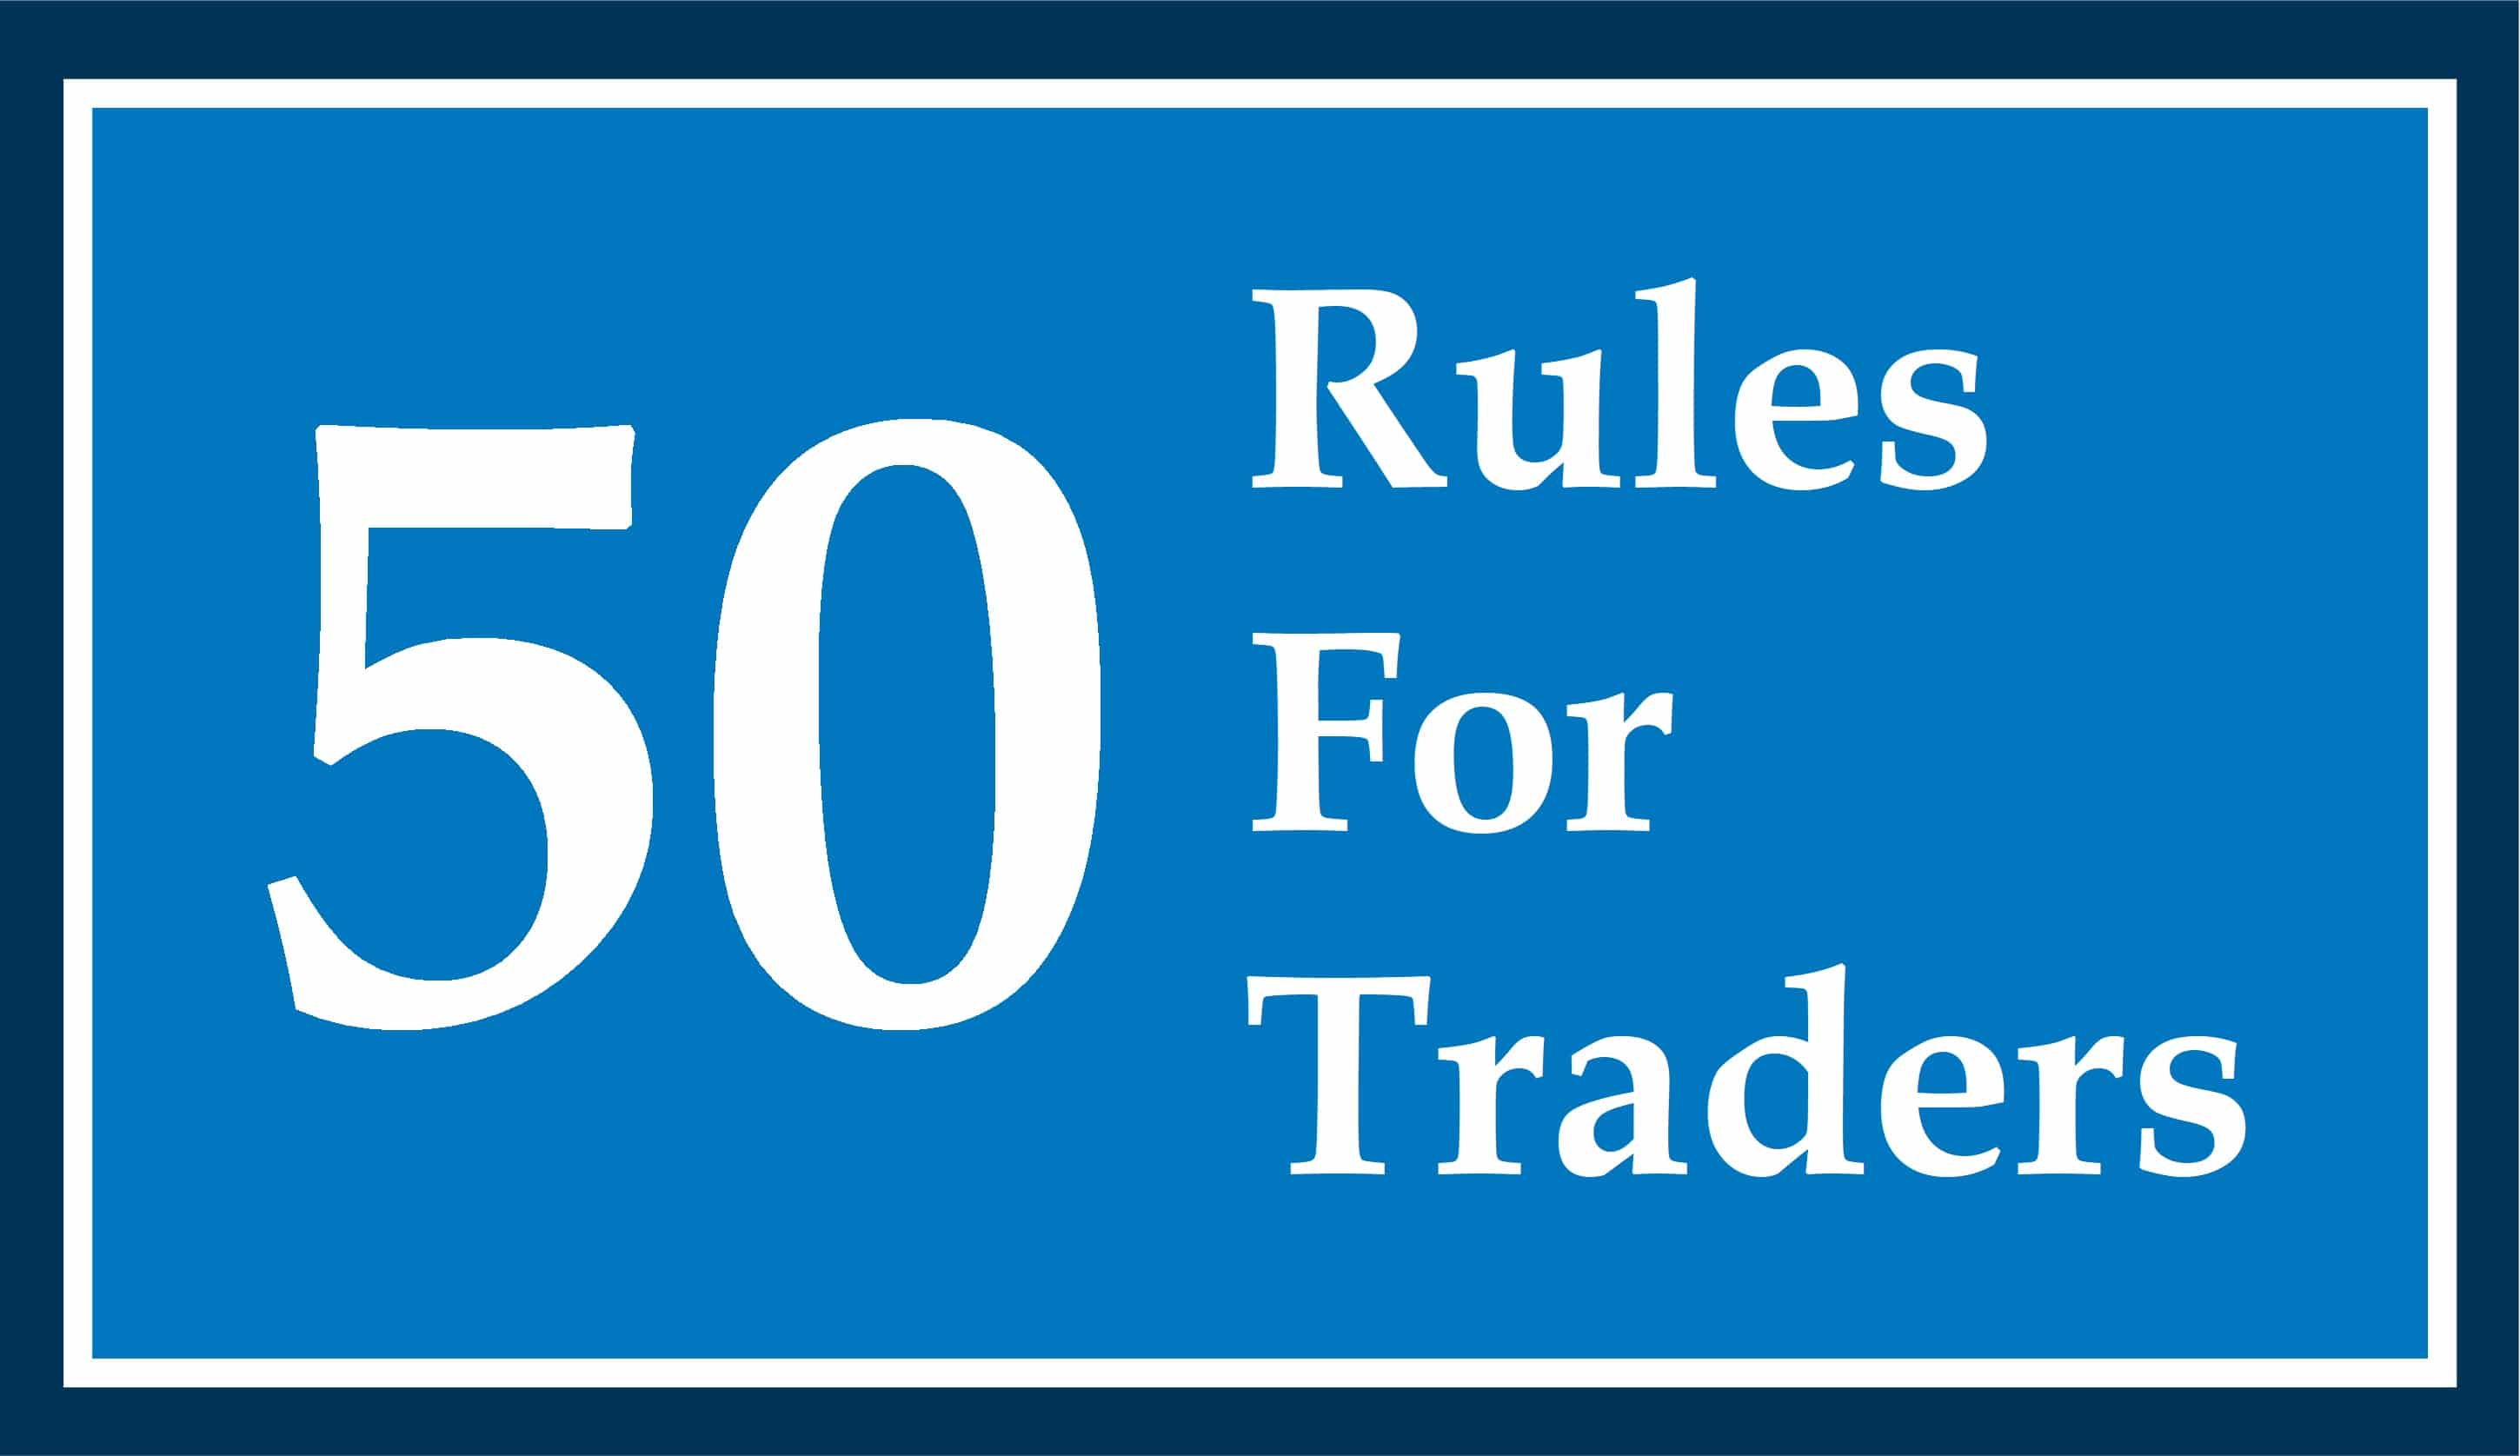 The Rules of Trading: 50 Golden Rules Traders Must Abide By